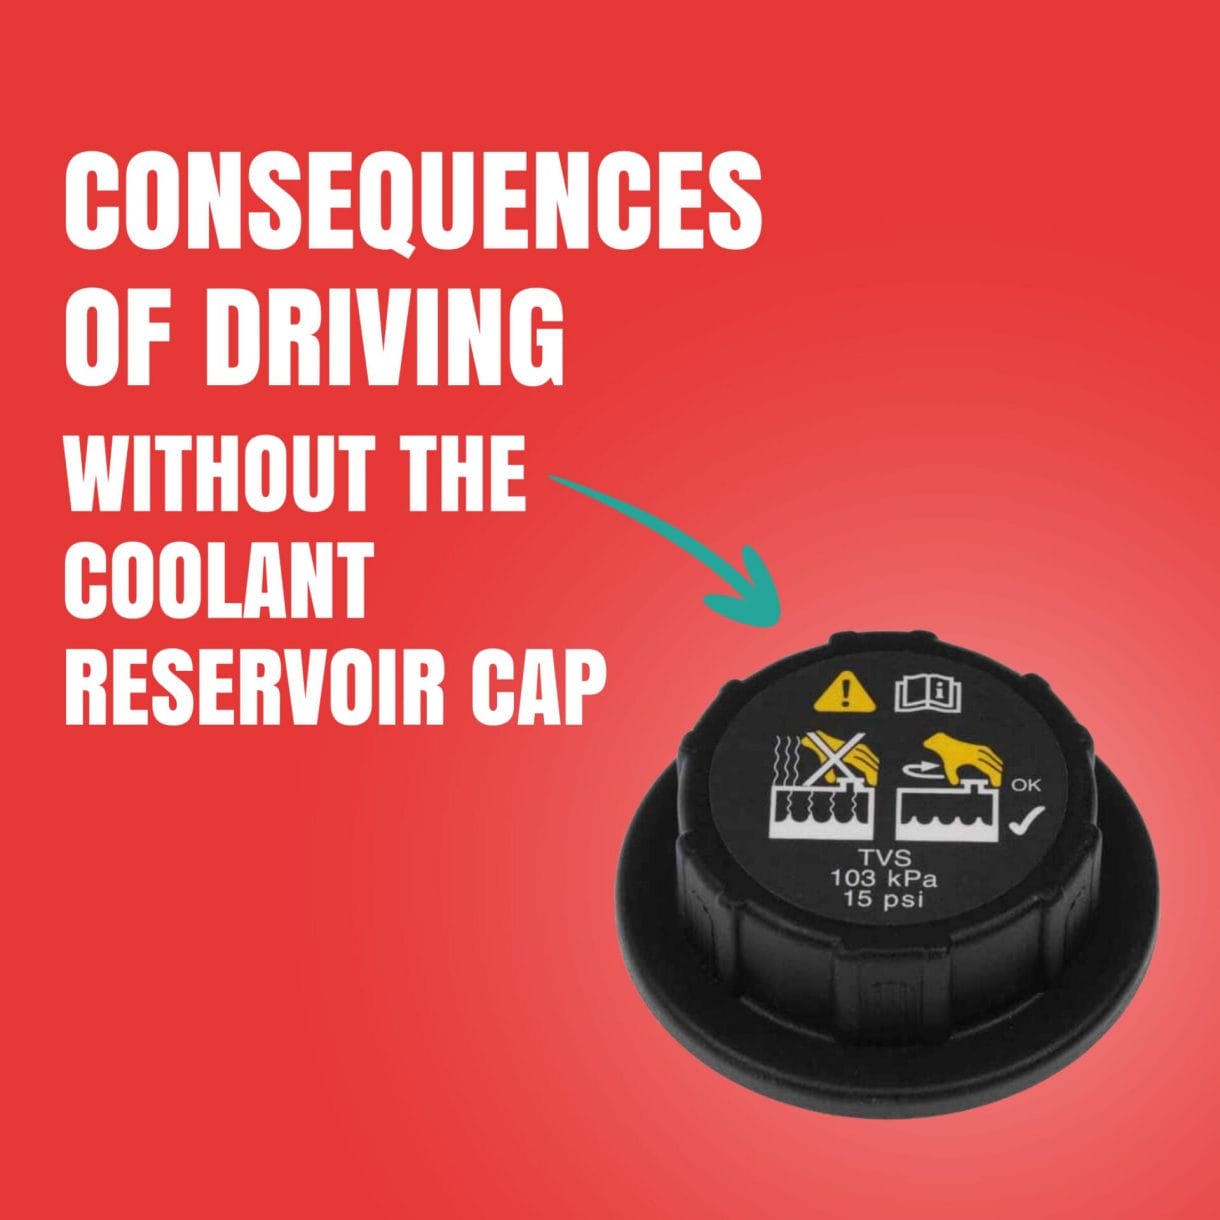 Consequences of Driving Without the Coolant Reservoir Cap